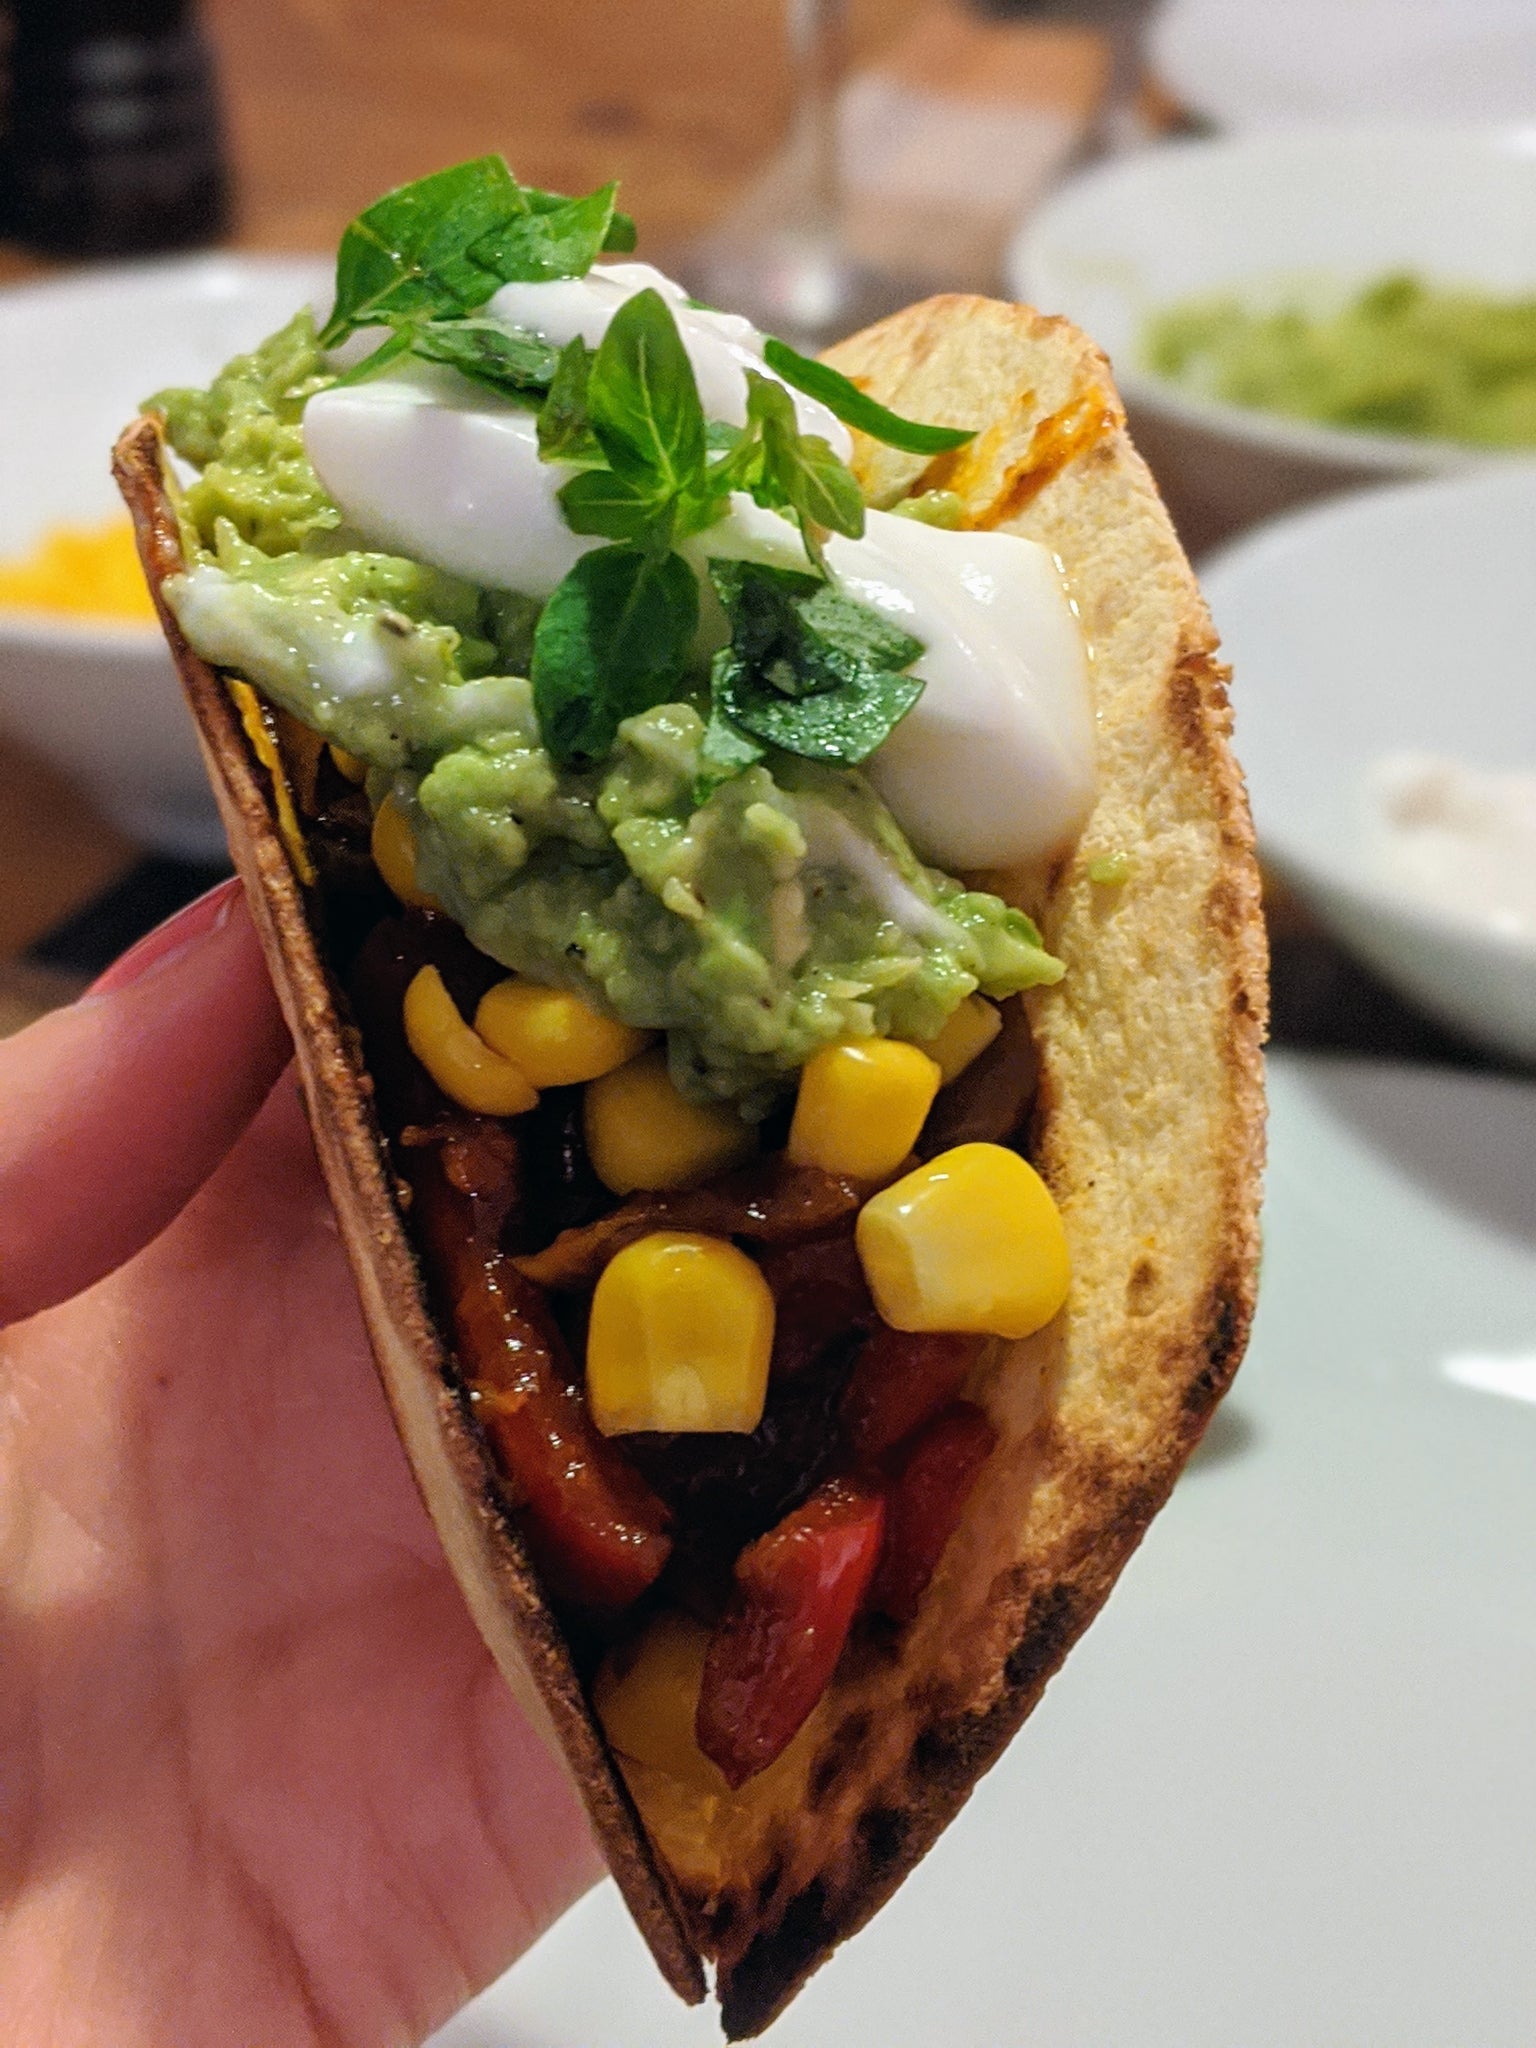 Yummy Tacos for a fun Dinner at Home